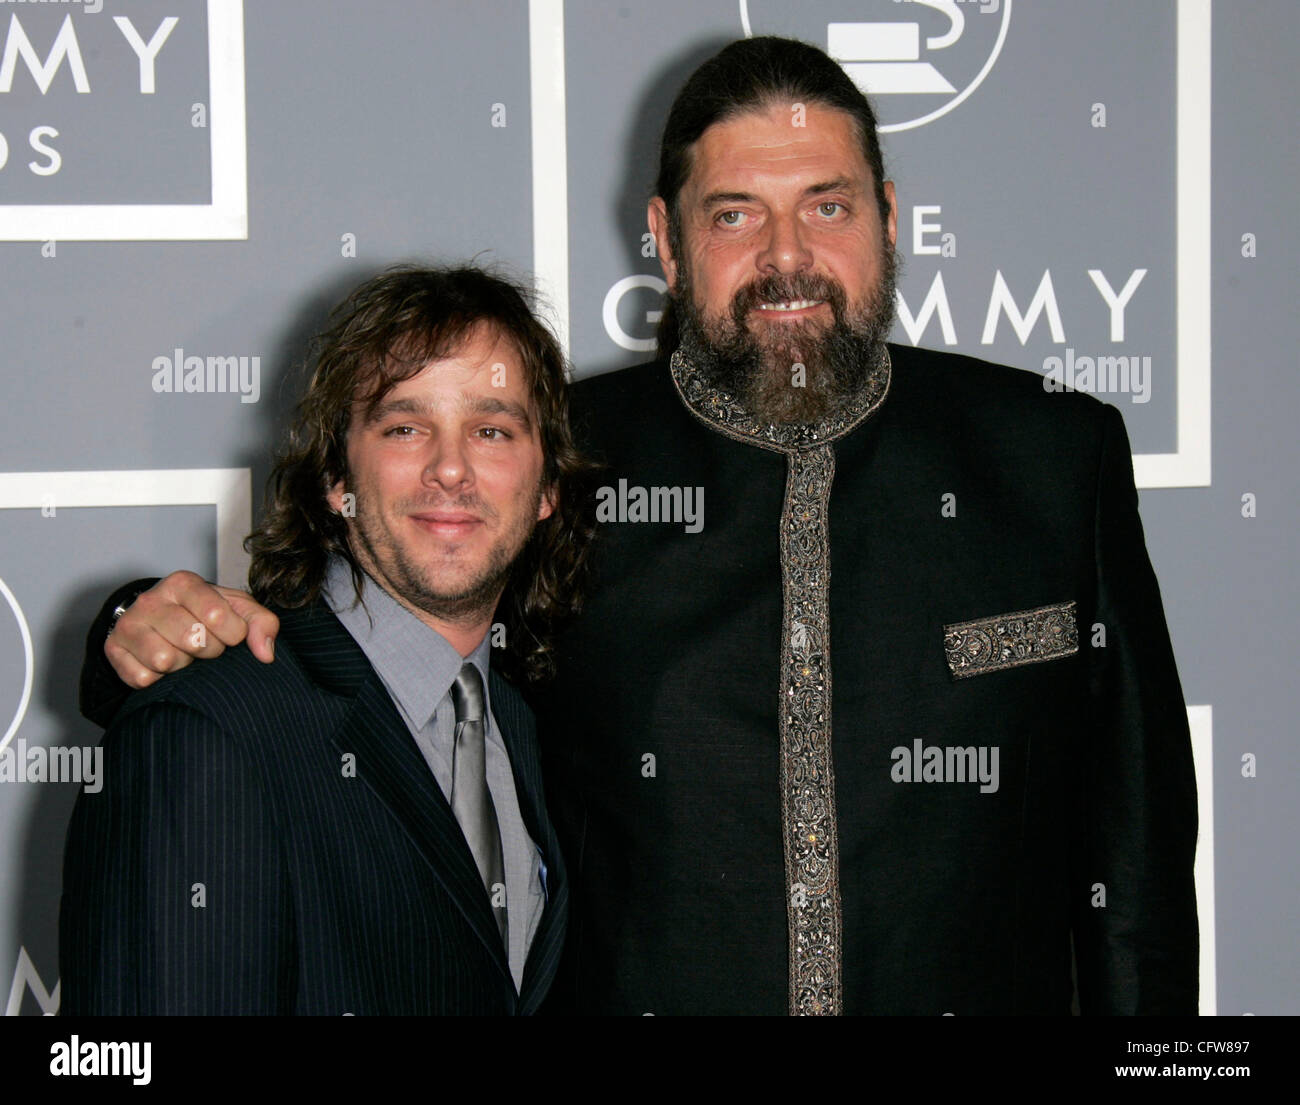 Feb 11, 2007; Los Angeles, CA, USA; GRAMMYS 2007: ALAN PARSONS PROJECT arriving at the 49th Annual Grammy Awards held at Staples Center in Los Angeles. Mandatory Credit: Photo by Lisa O'Connor/ZUMA Press. (©) Copyright 2007 by Lisa O'Connor Stock Photo